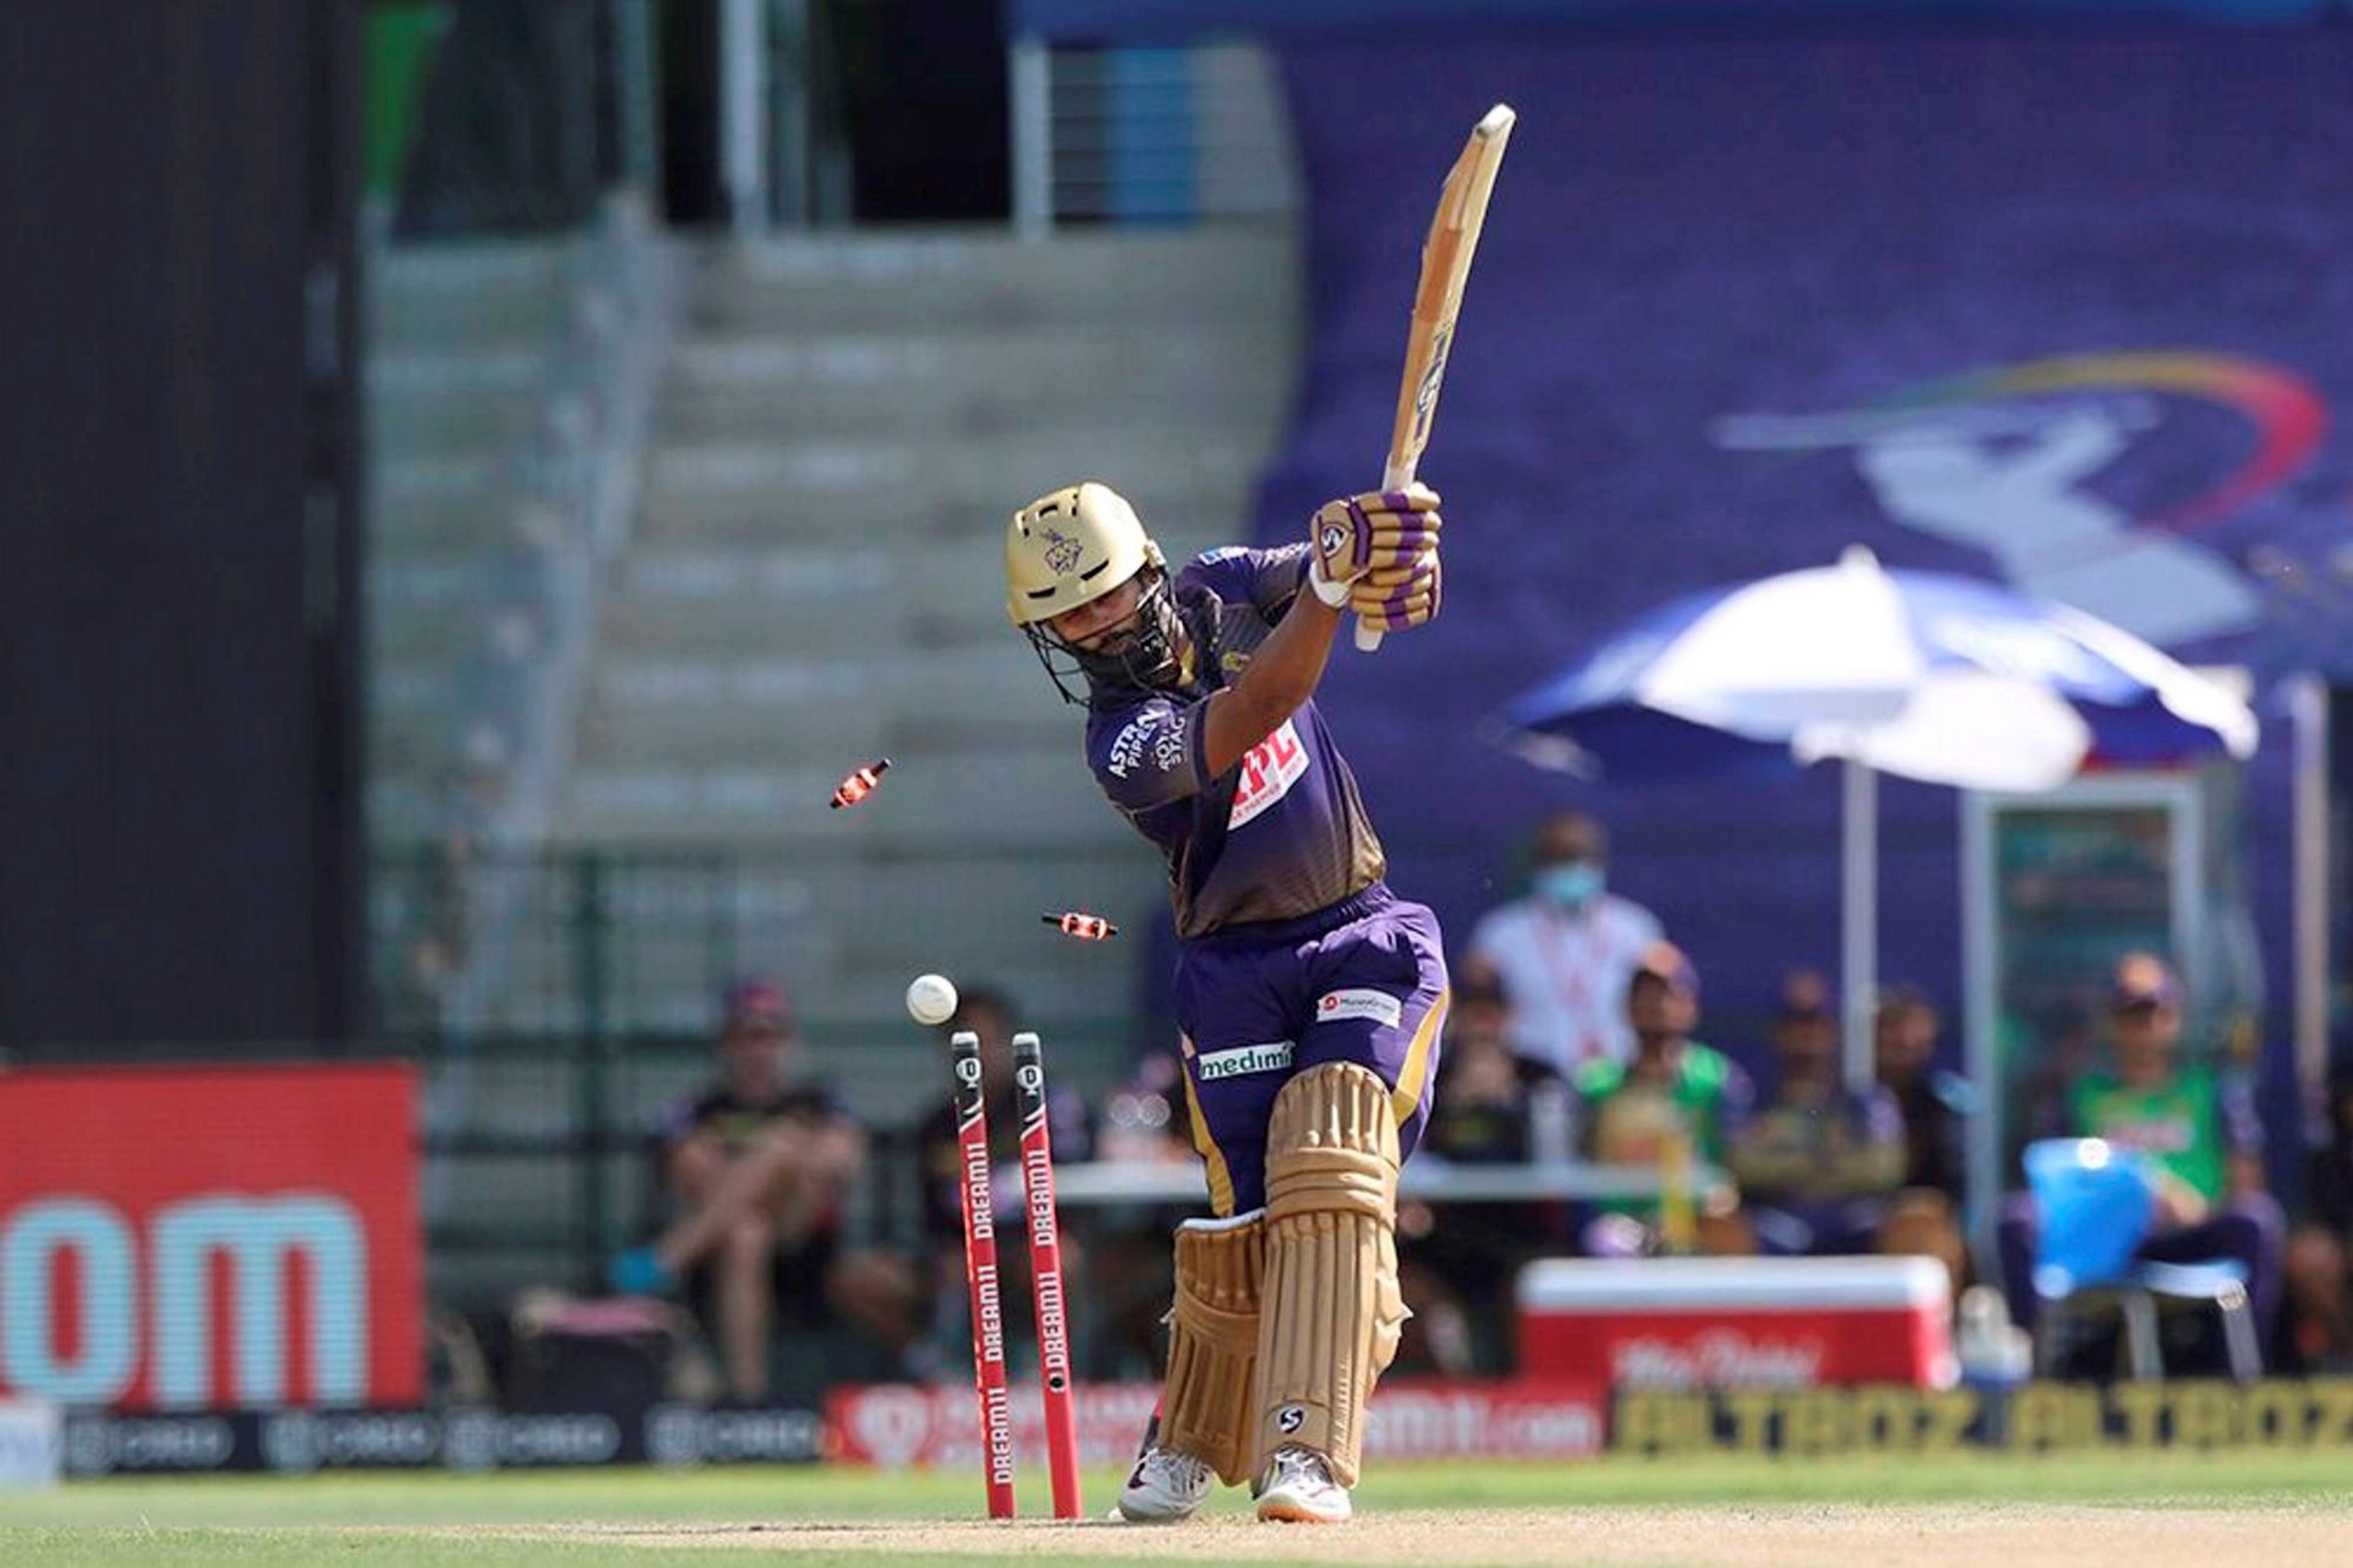 IPL 2022: When and where to watch KKR vs RR live streaming and telecast?